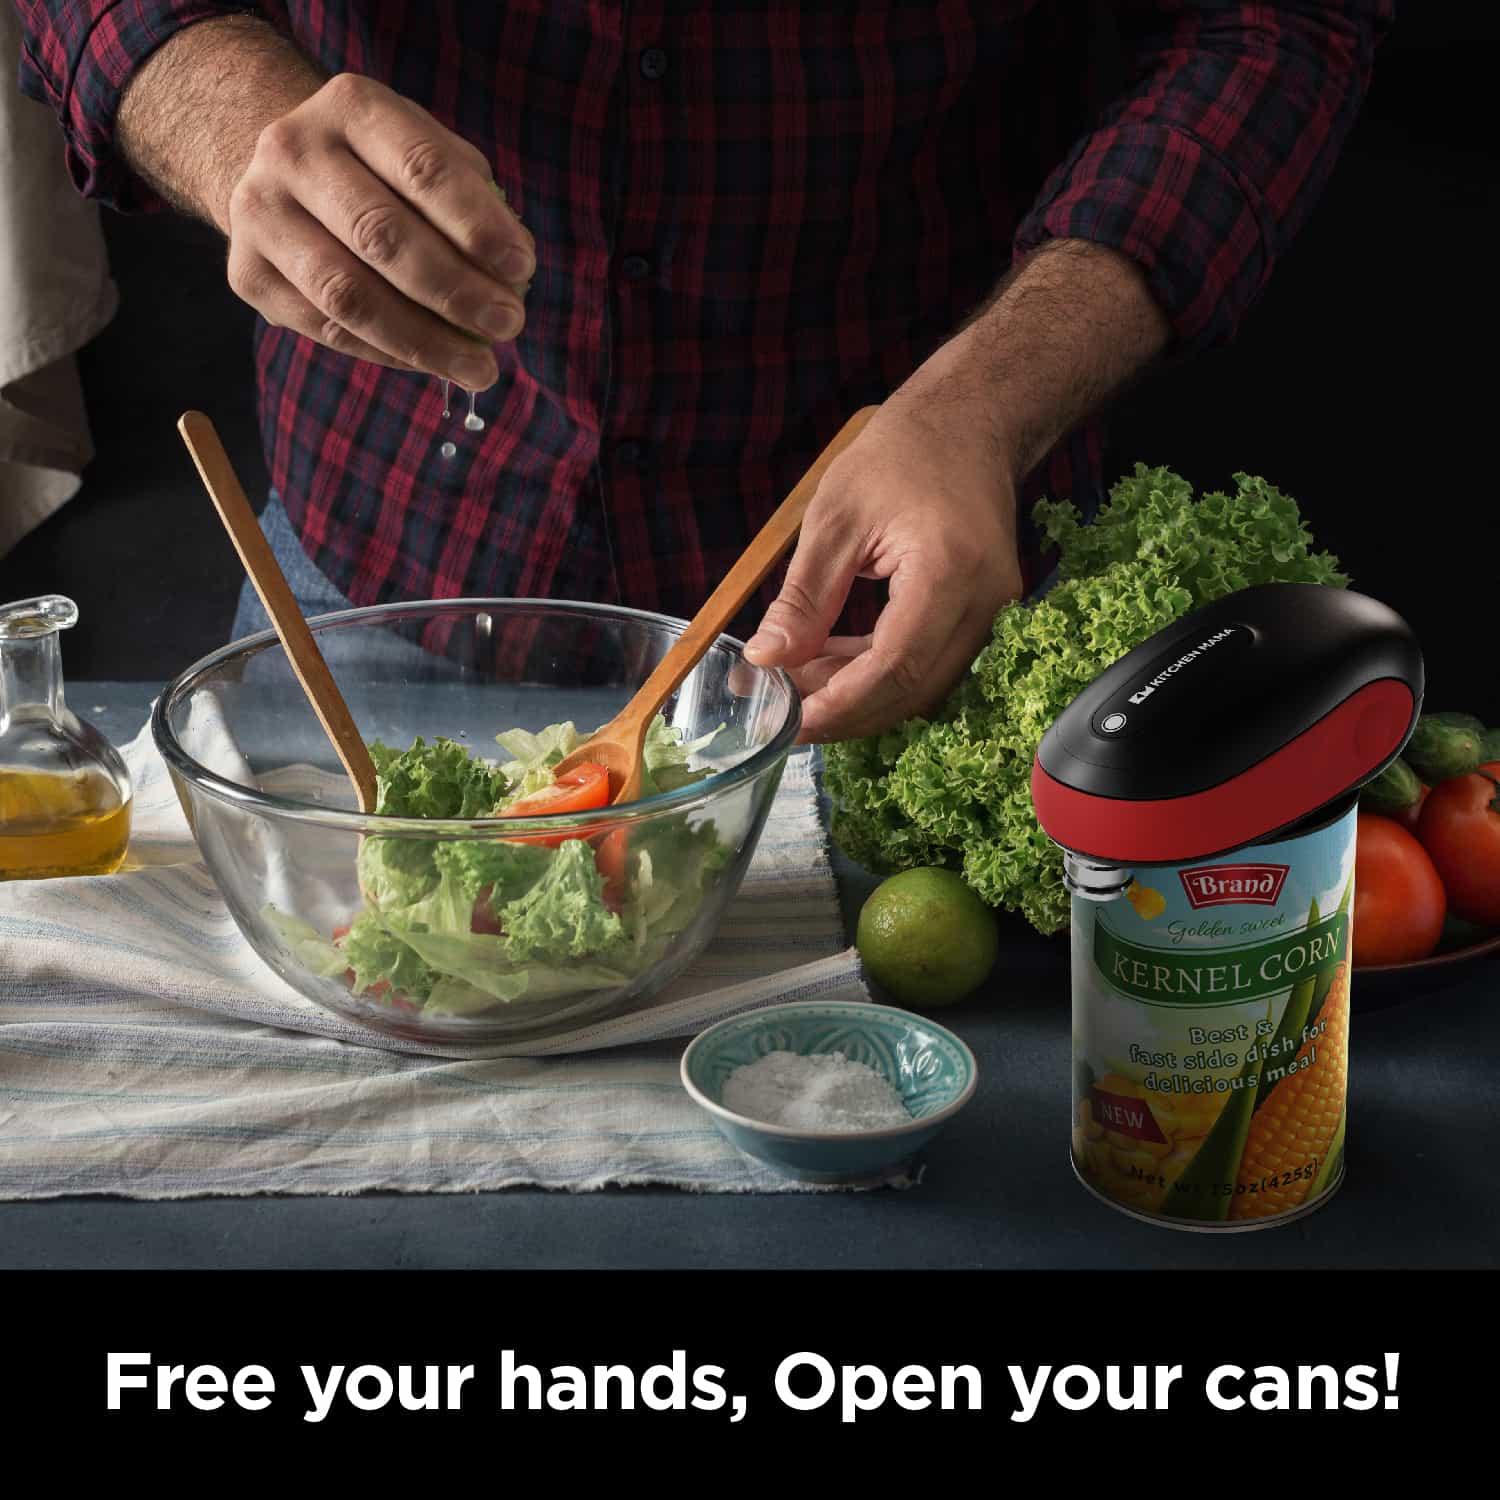  Electric Can Openers For Kitchen For Seniors With Arthritis-  Rechargeable Automatic Can Opener For Any Size Cans - Smooth Edge, Food  Safe, Hands Free, Portable Small Size One Touch Side Cut